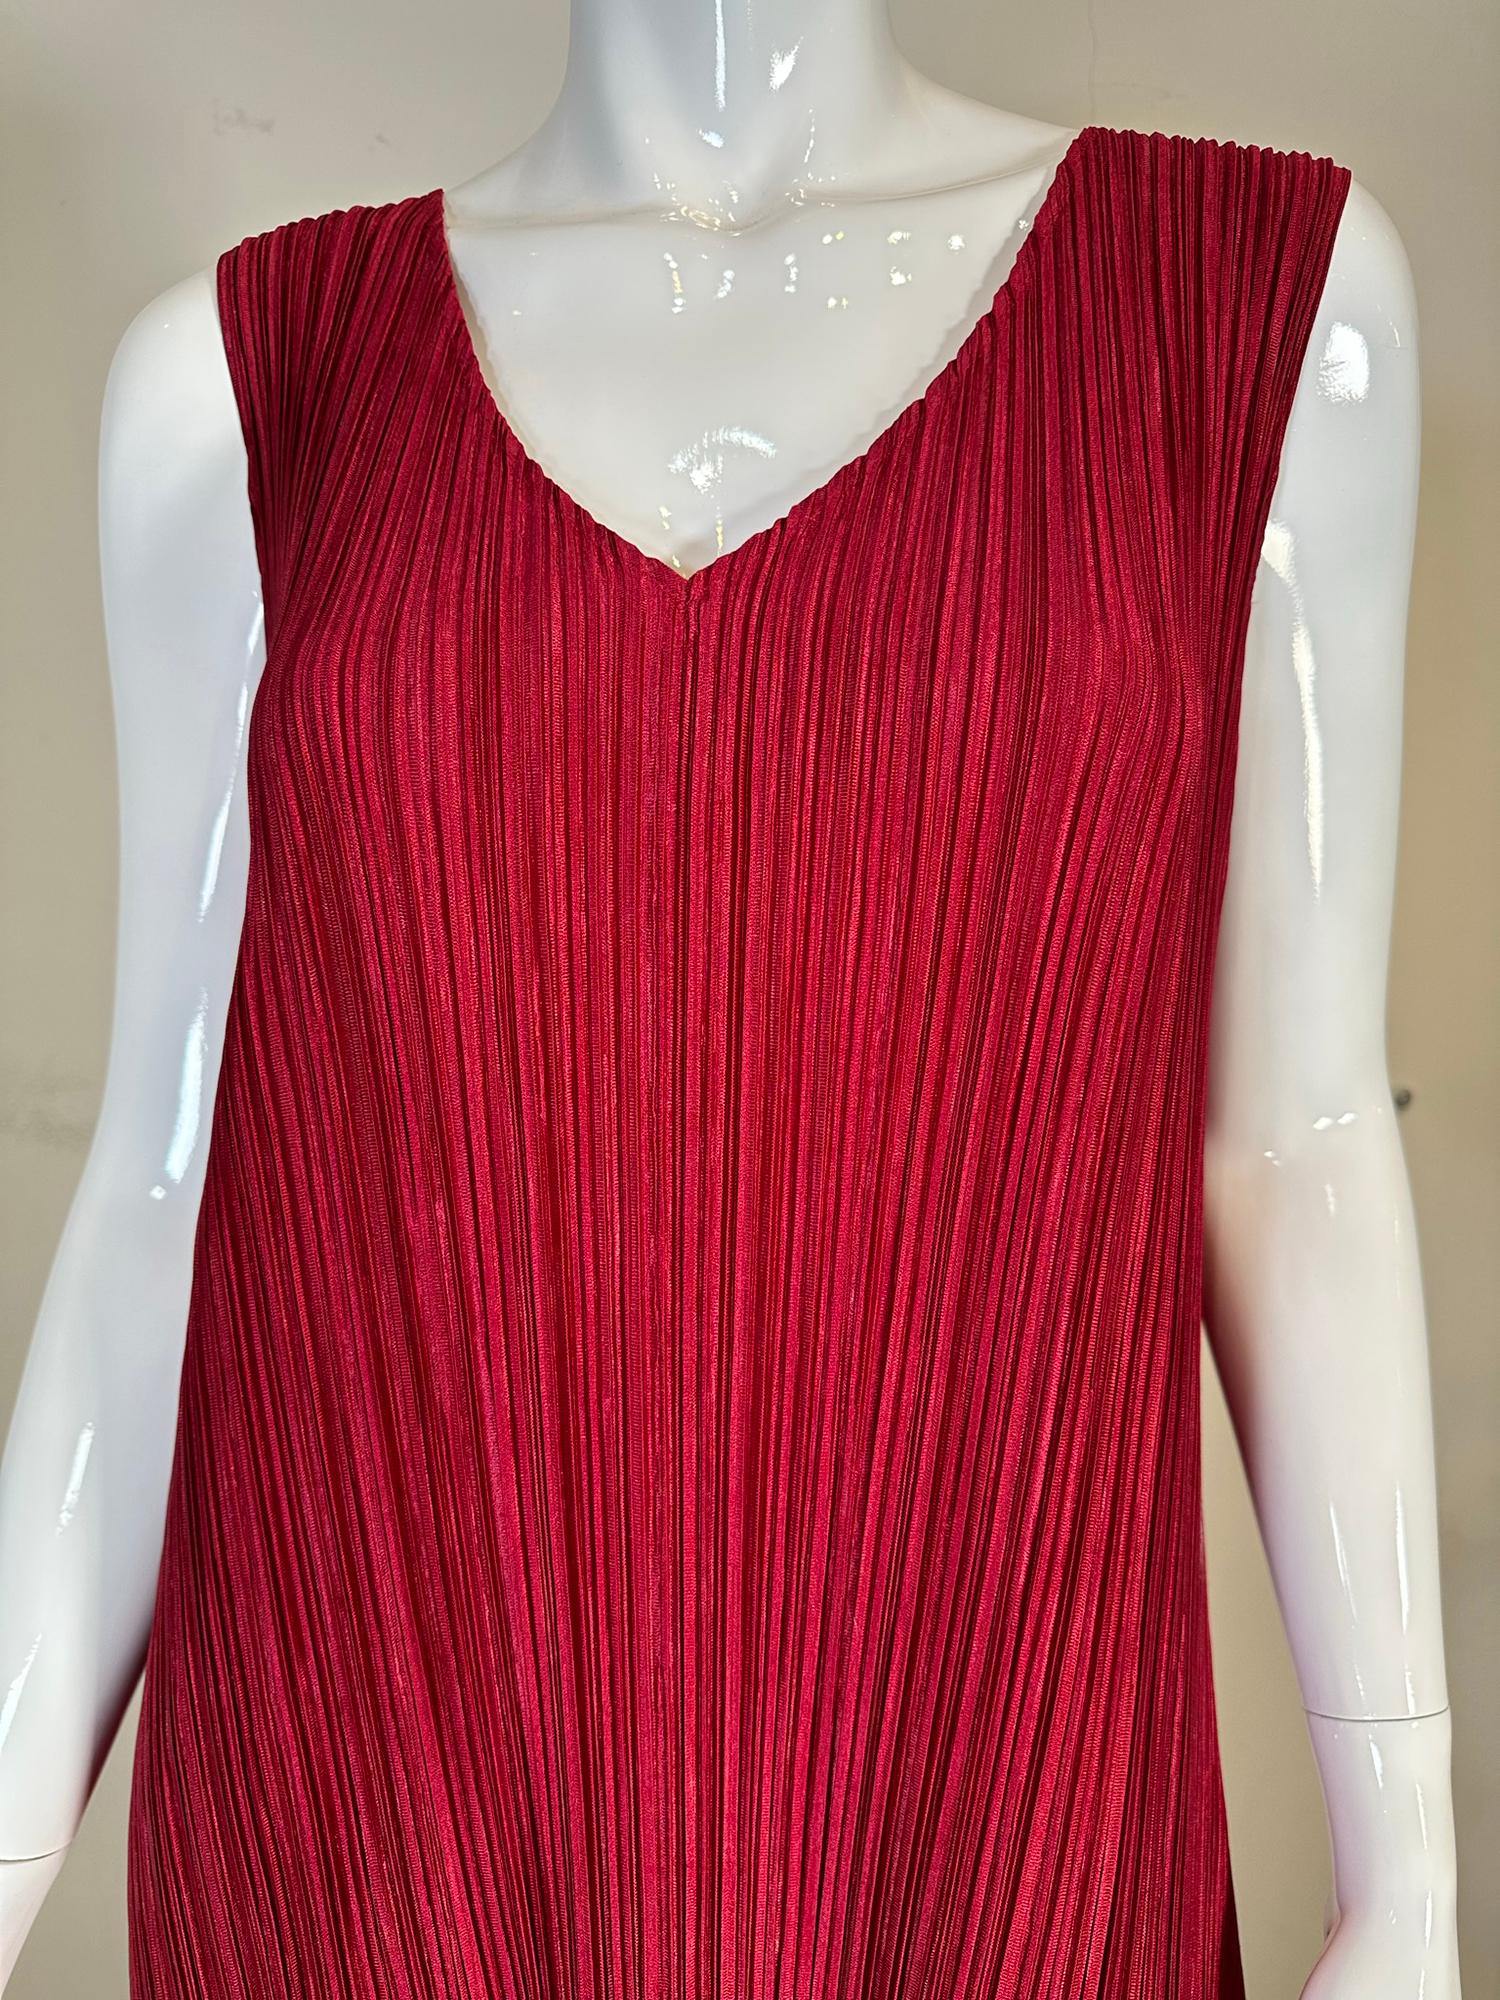 Issey Miyake Pleats Please V neck, sleeveless, shaped hem maxi dress, marked size 5 M-L. Great layering piece! Pull on dress. The lower skirt poofs out at each side. Looks barely worn.
In excellent wearable condition.  All our clothing is dry